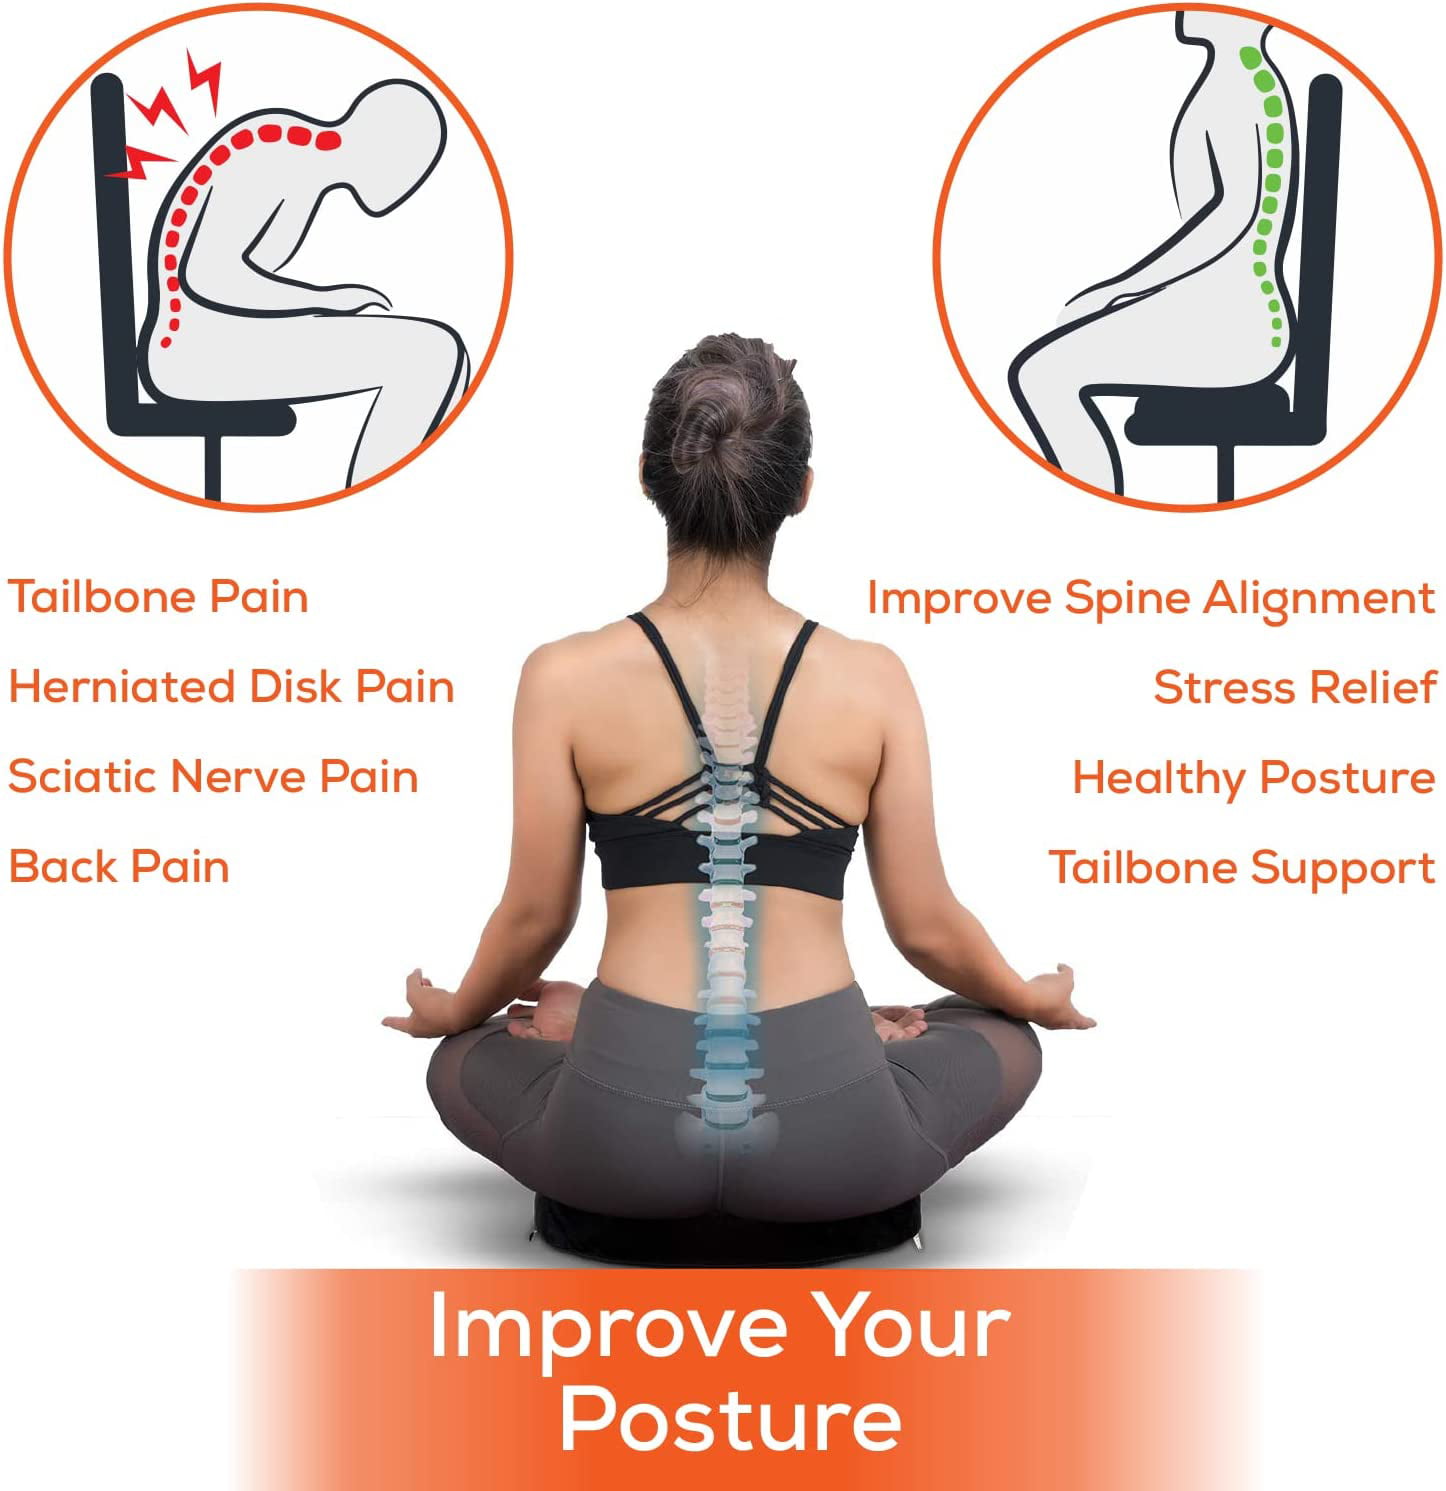  2023 Upgrades Car Coccyx Seat Cushion Pad for Sciatica Tailbone  Pain Relief, Heightening Wedge Booster Seat Cushion for Short People  Driving, Truck Car Accessories Driver, for Office Chair : Health 